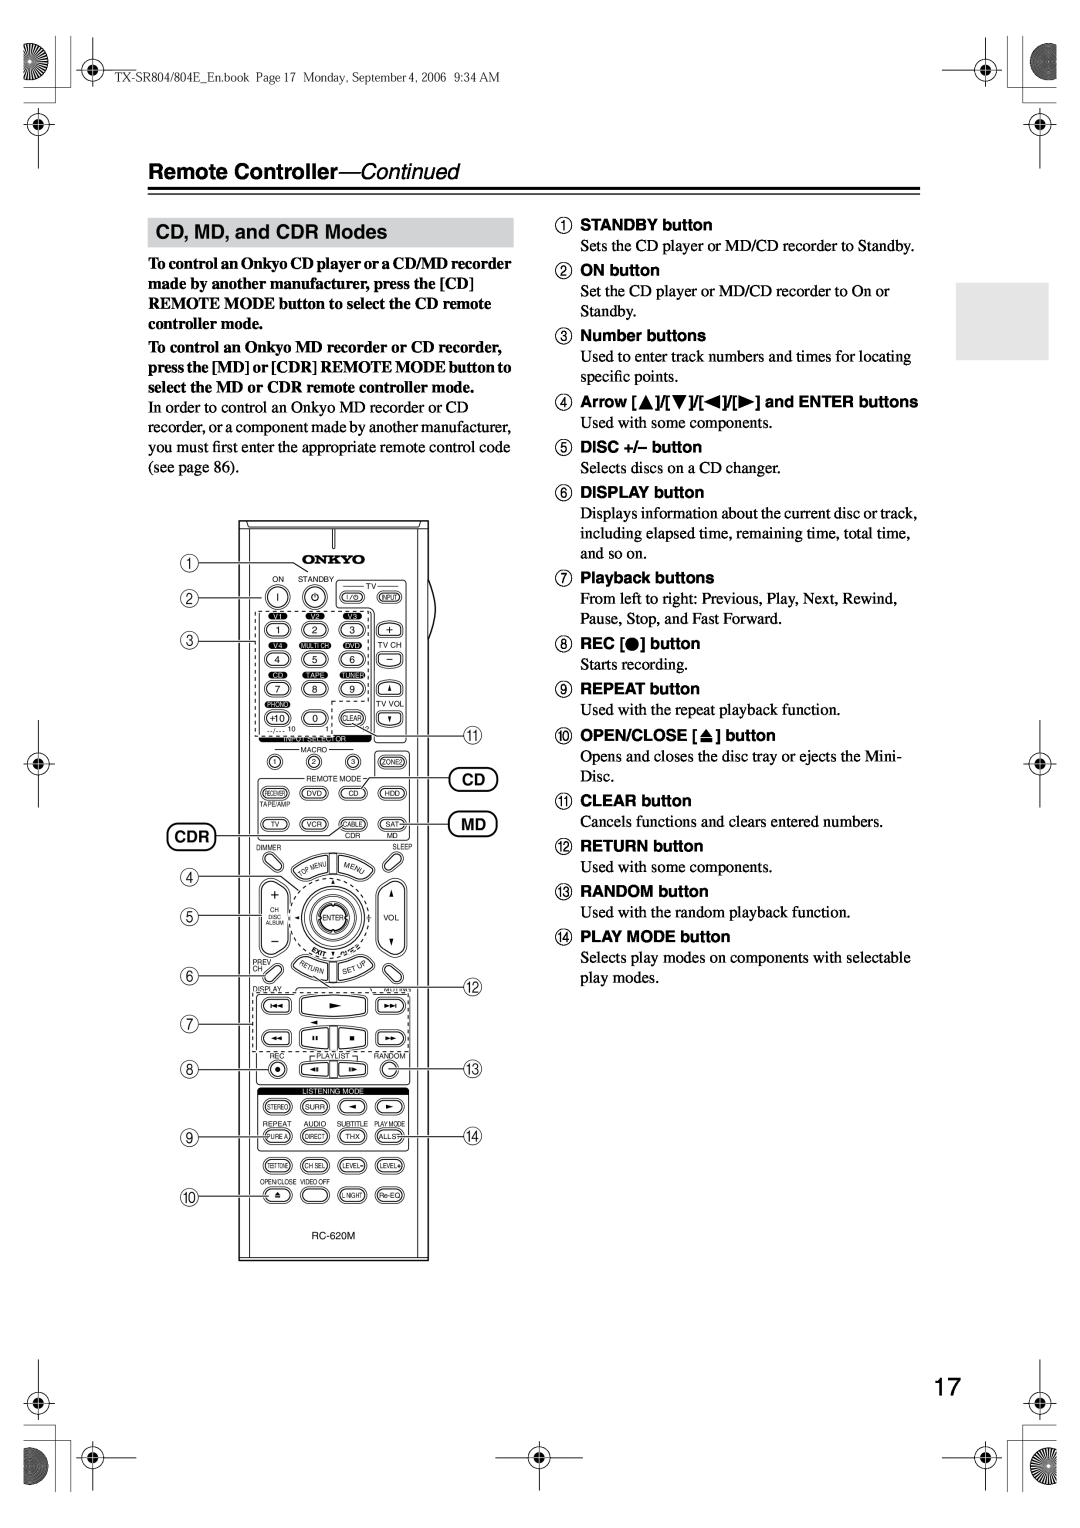 Onkyo TX-SR804E instruction manual CD, MD, and CDR Modes, Remote Controller-Continued 